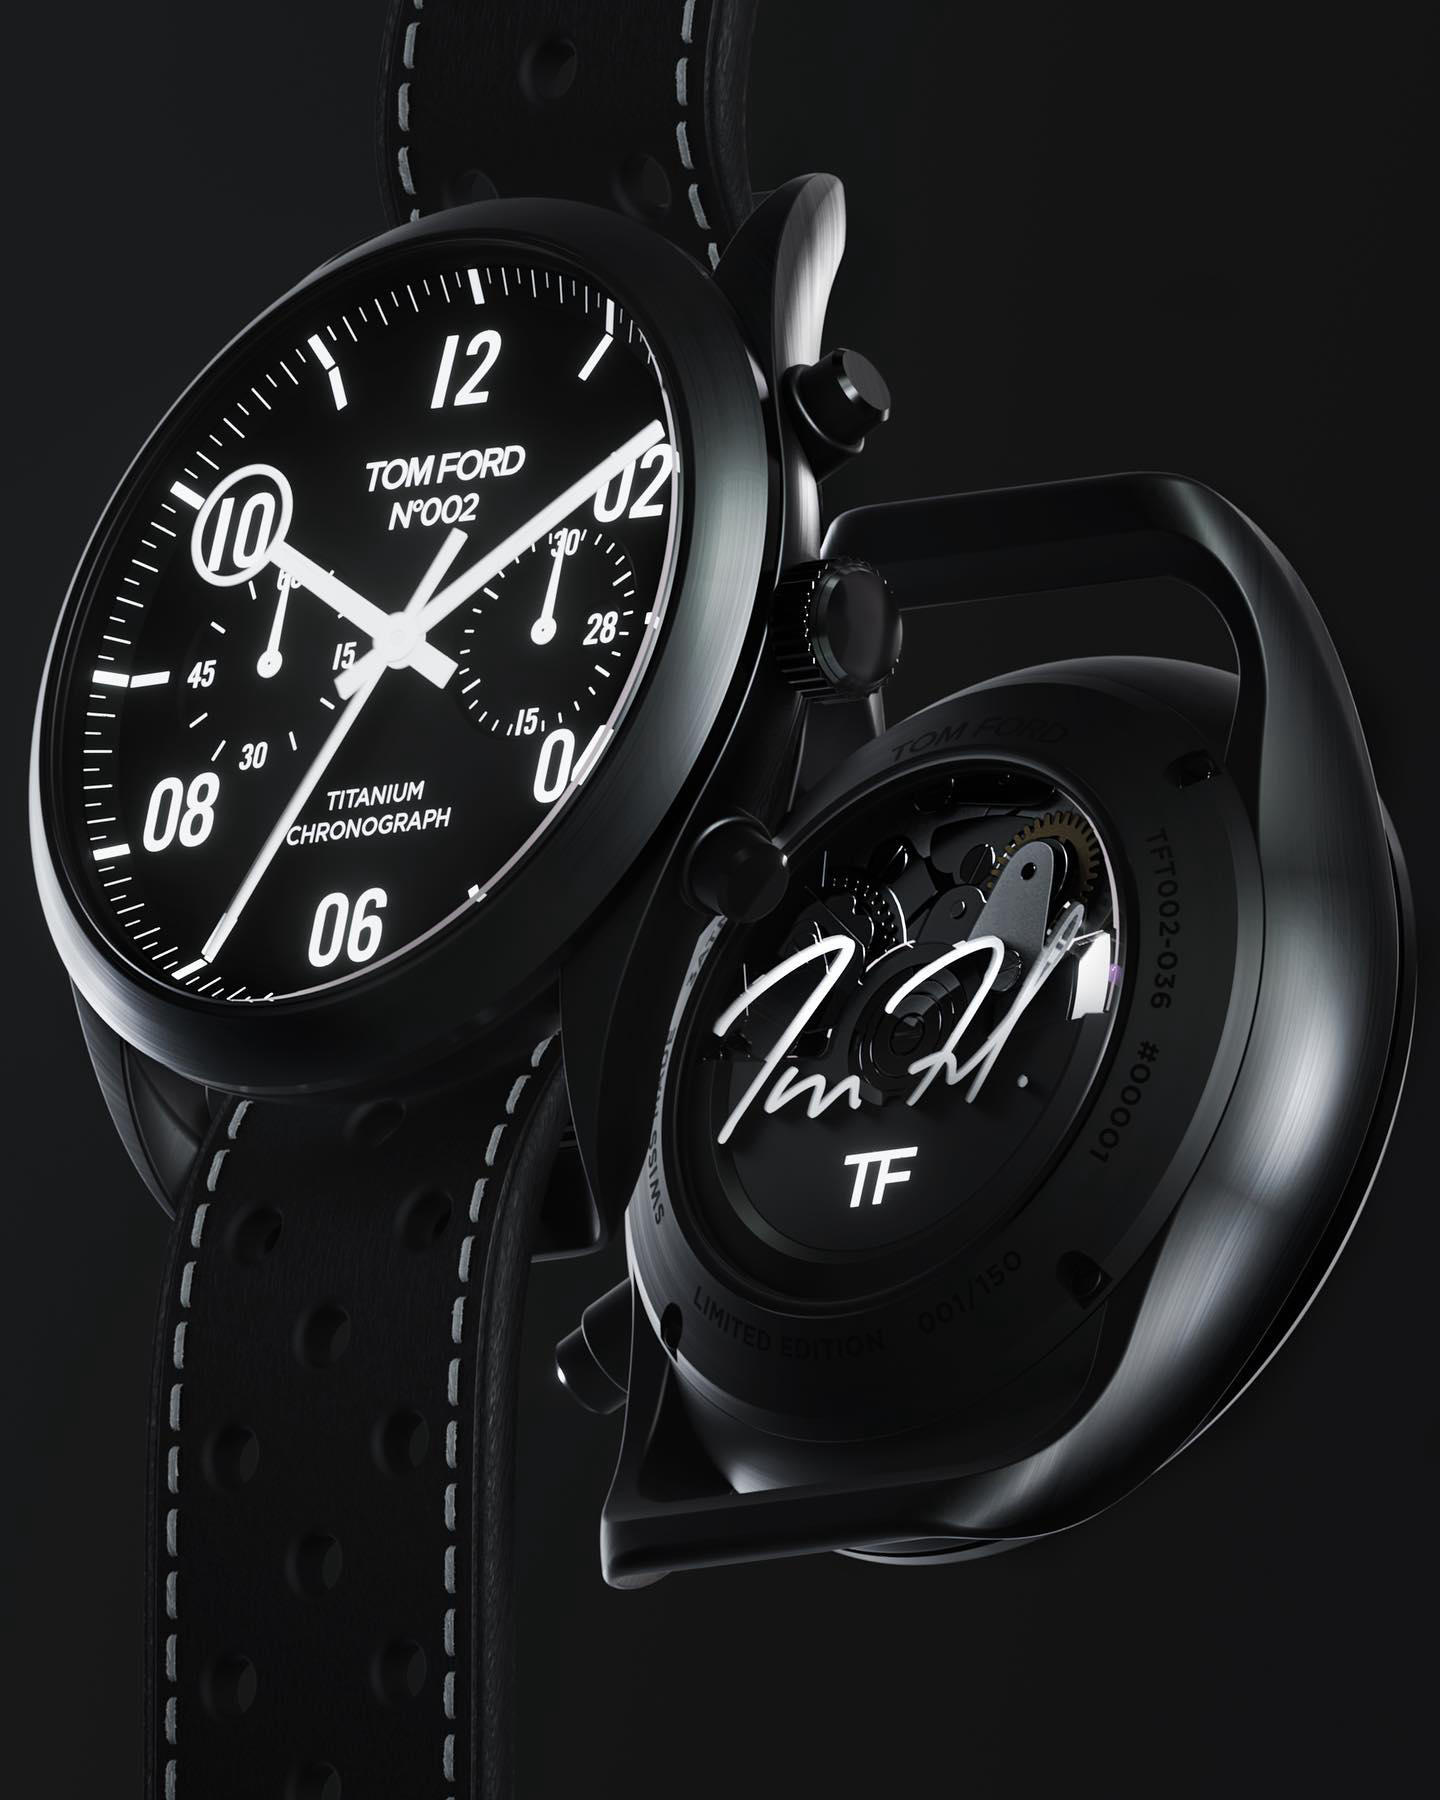 TOM FORD - INTRODUCING THE 002 LIMITED-EDITION CHRONOGRAPH TIMEPIECE